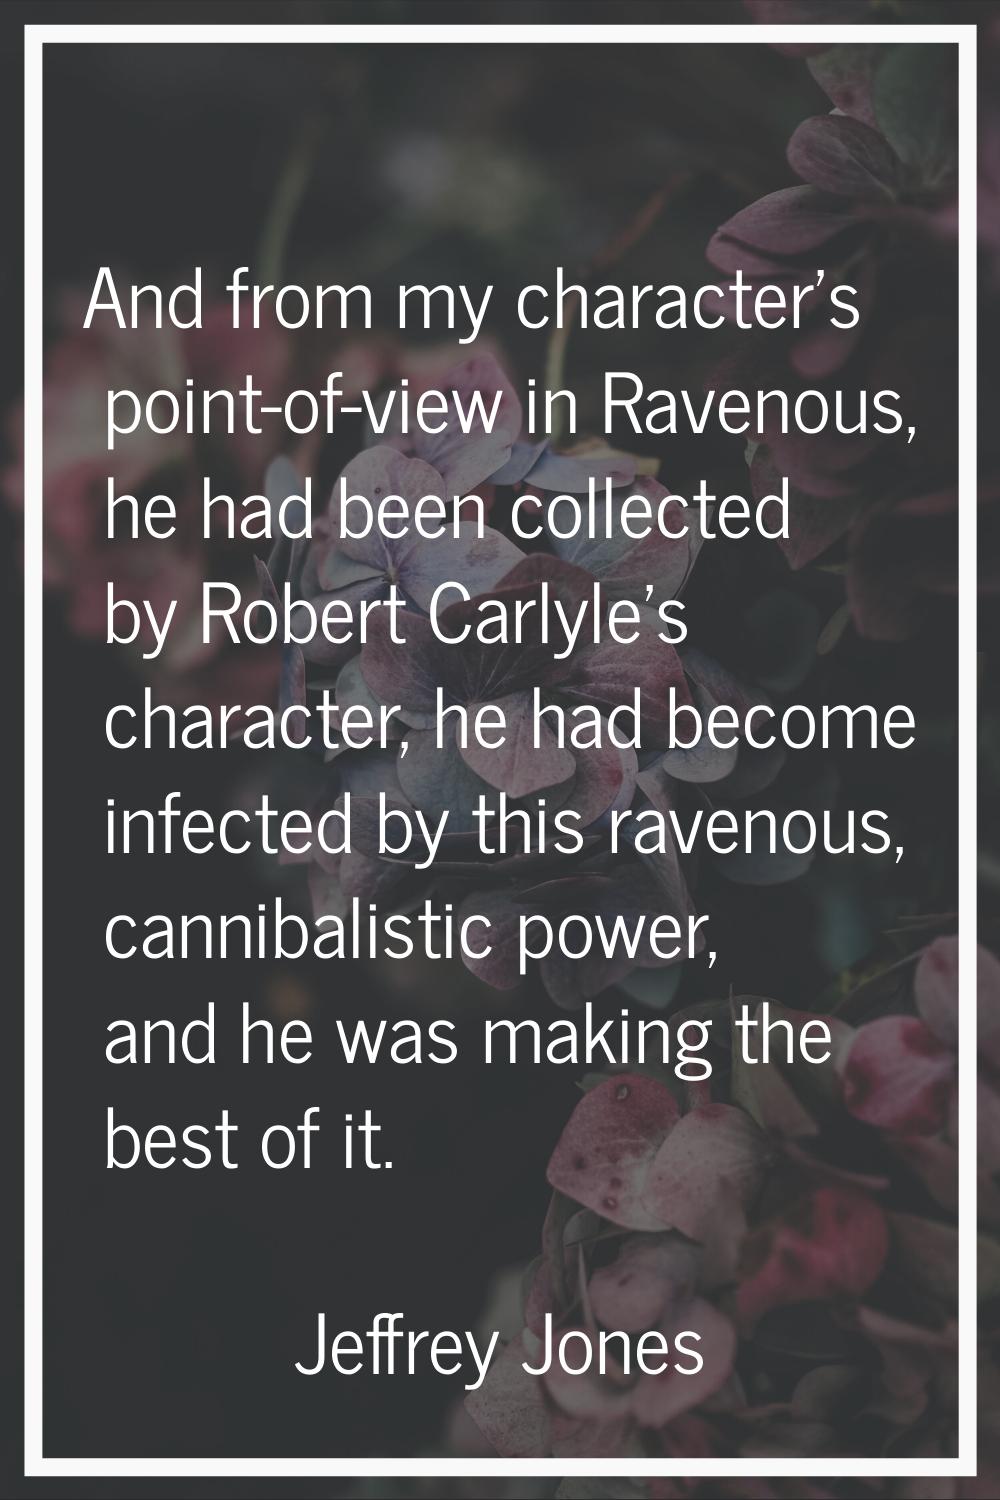 And from my character's point-of-view in Ravenous, he had been collected by Robert Carlyle's charac